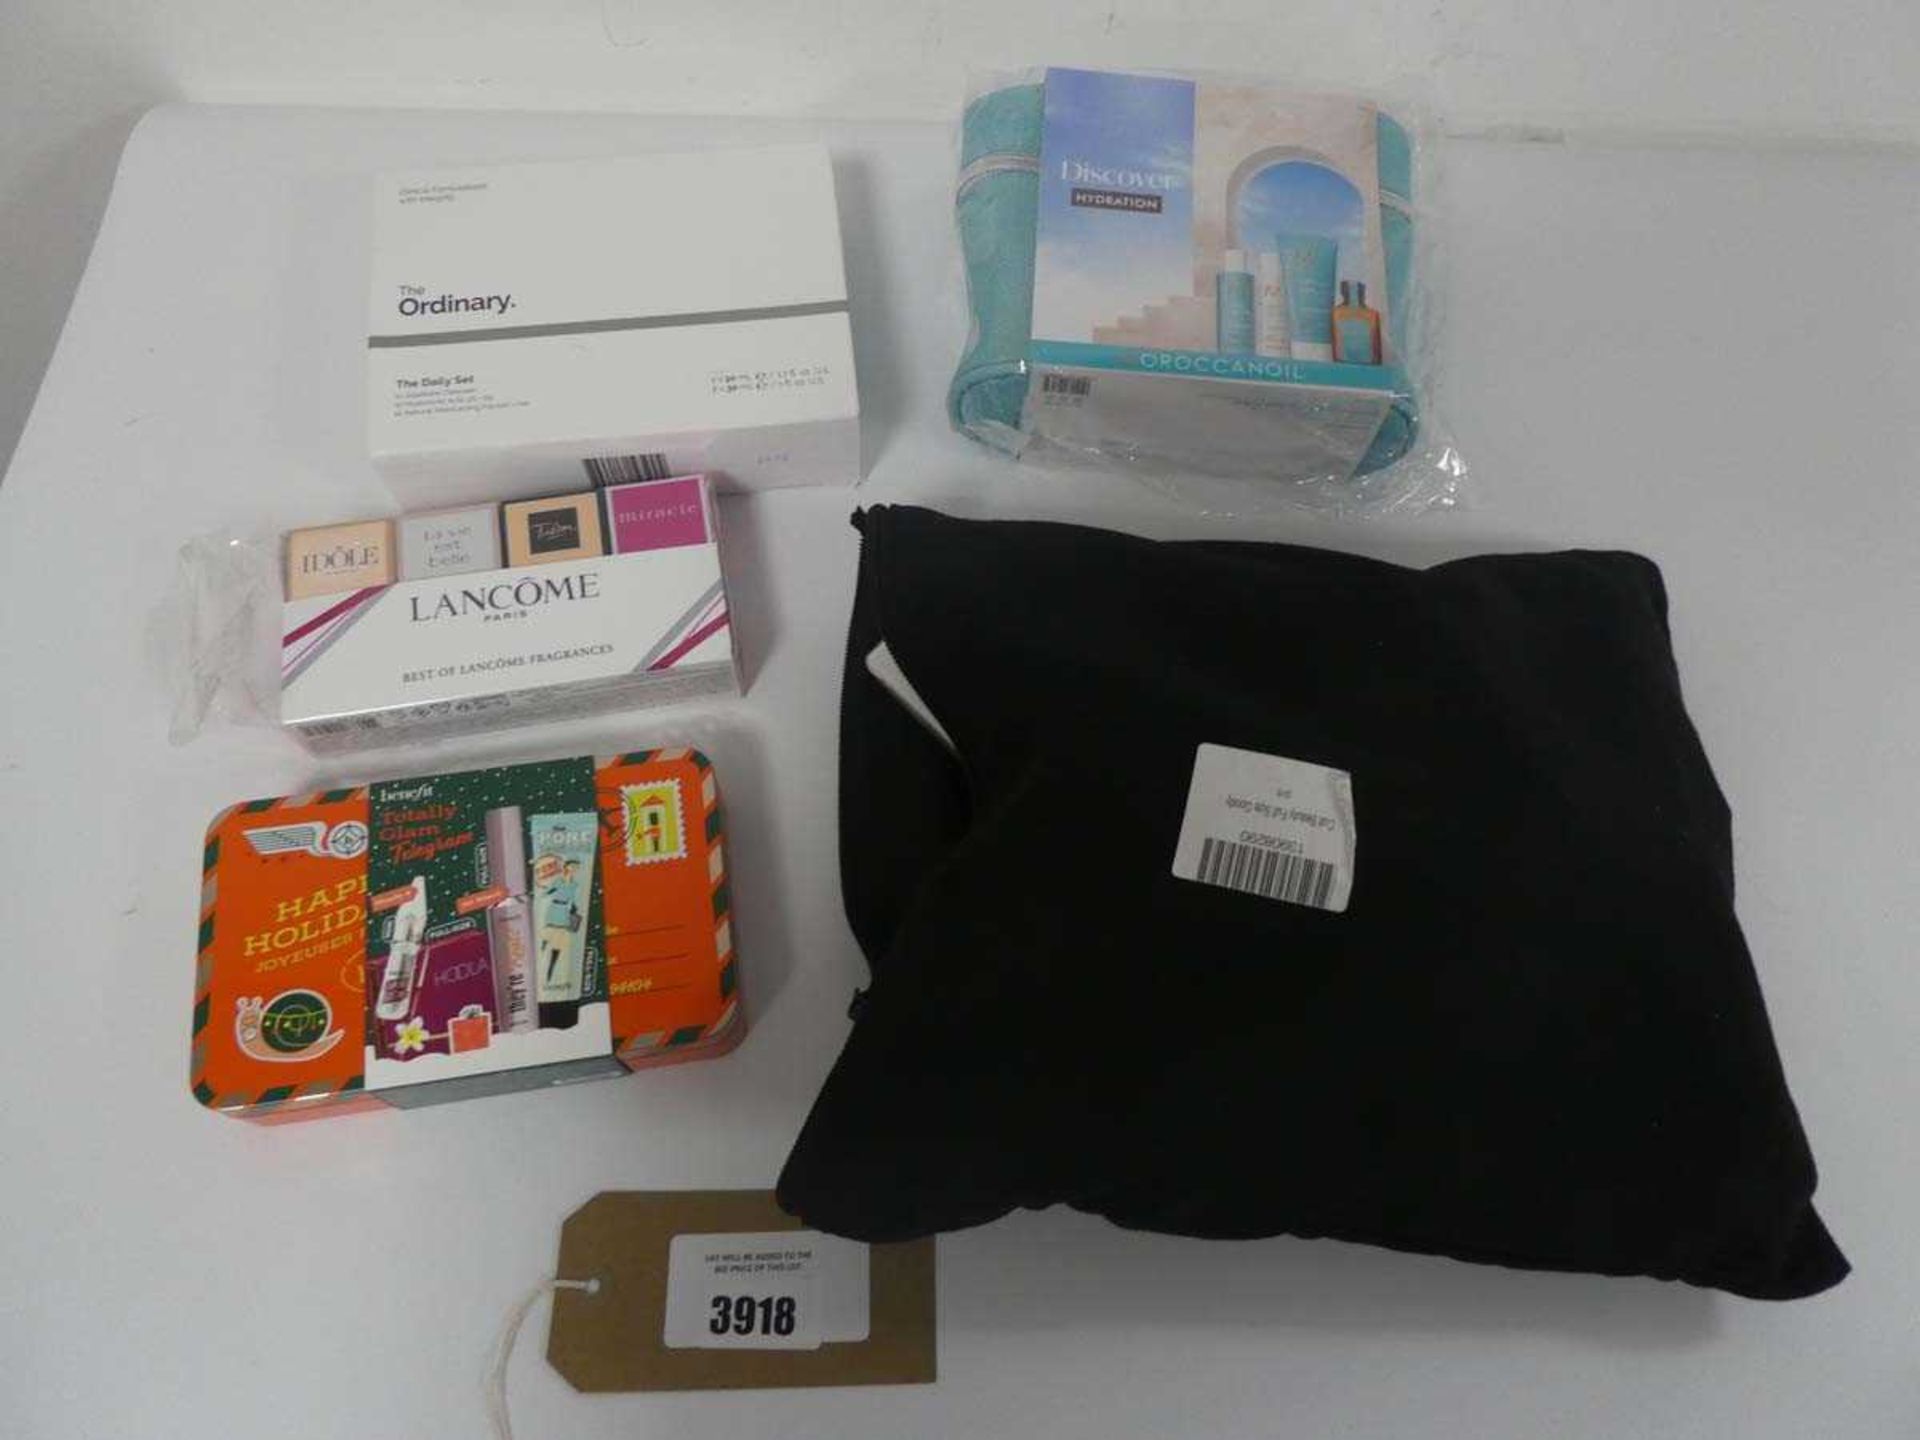 +VAT 5 gifts sets to include Lancome, benefit, The ordinary, Moroccan oil and Cult beauty goody